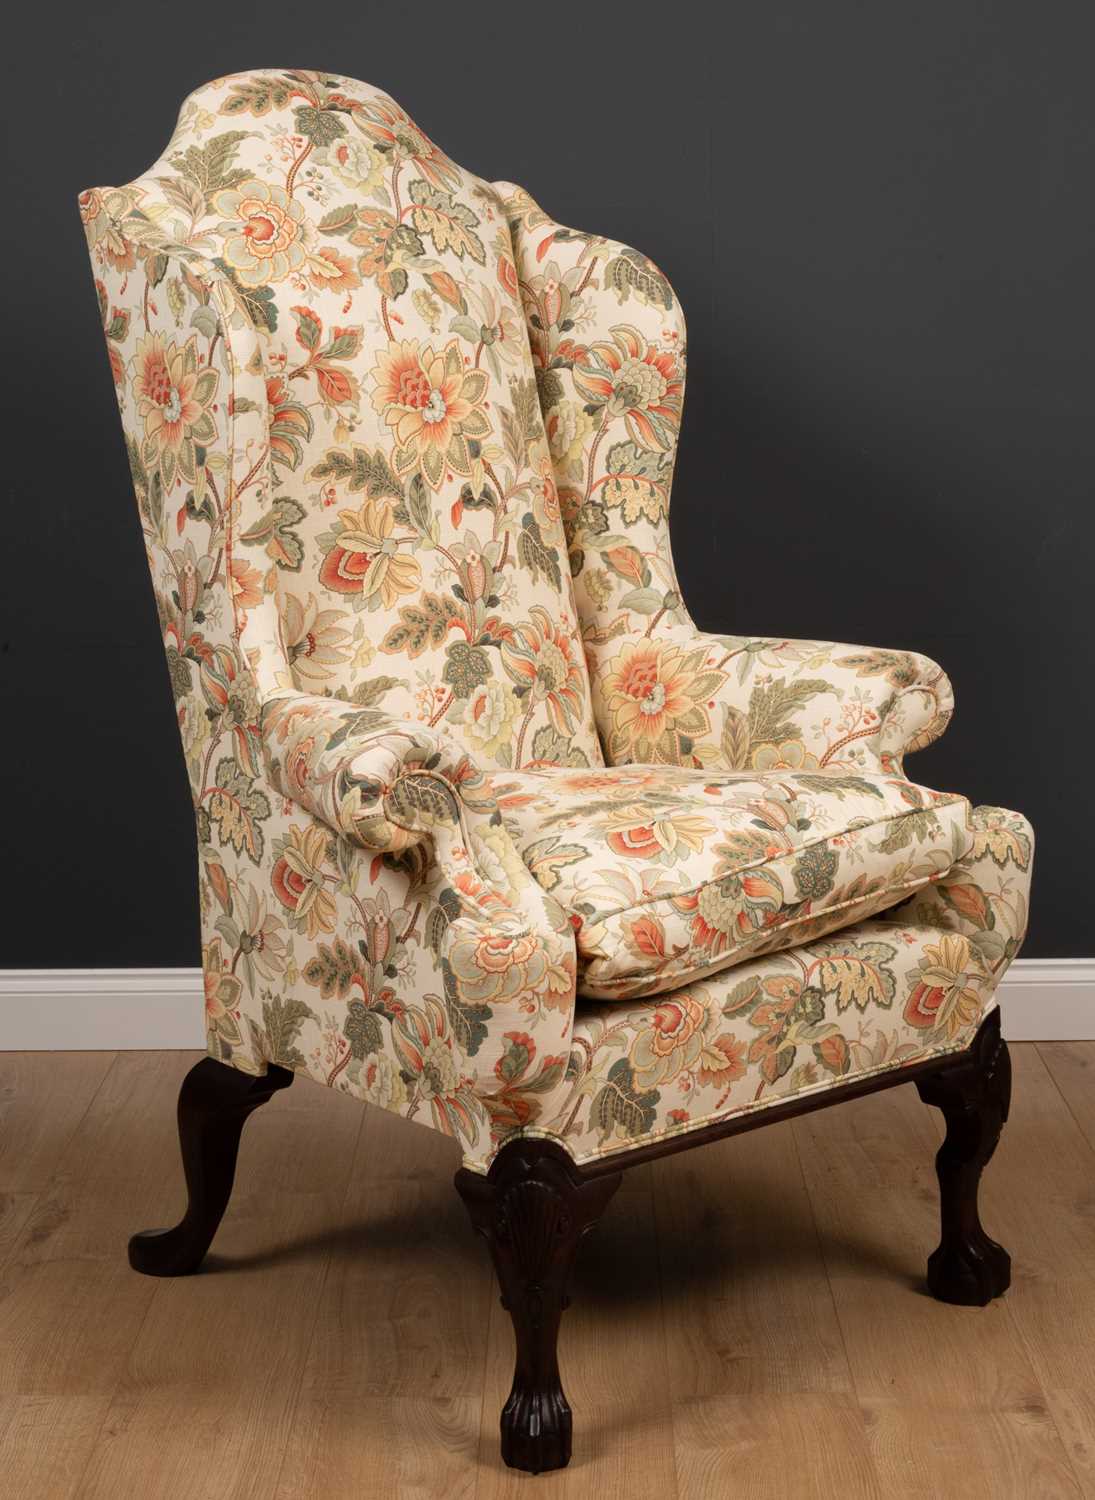 A George II style wingback armchair with floral upholstery and label for 'The Odd Chair Company' - Image 2 of 7